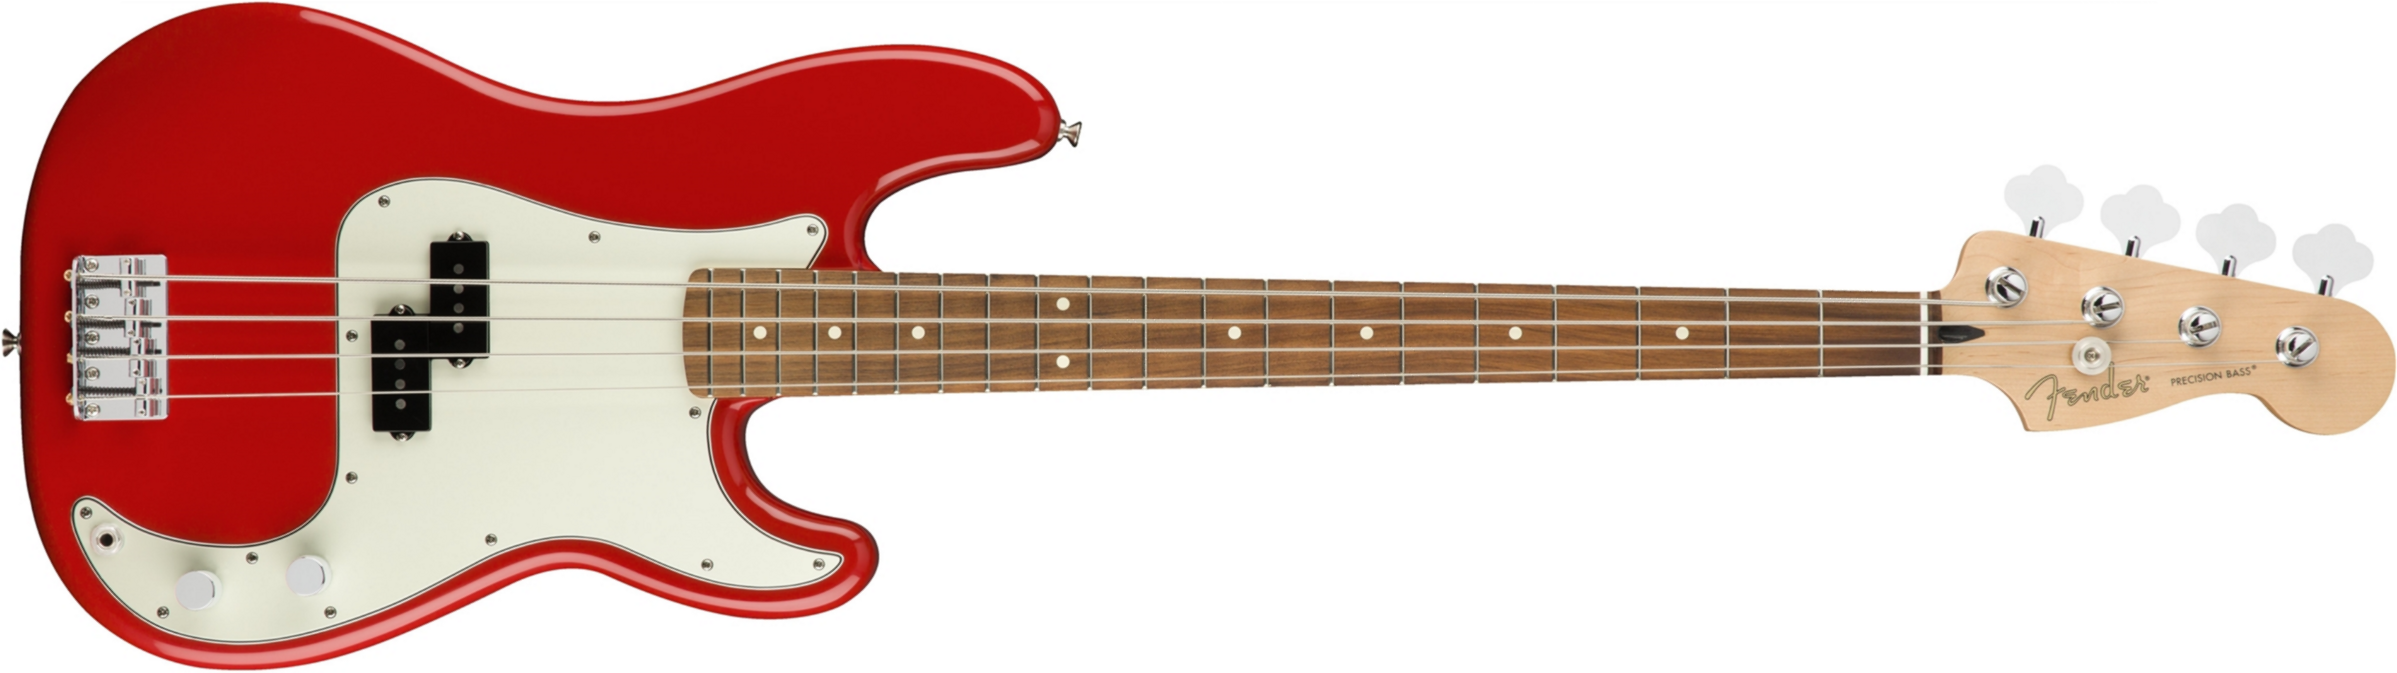 Fender Precision Bass Player Mex Pf - Sonic Red - Basse Électrique Solid Body - Main picture